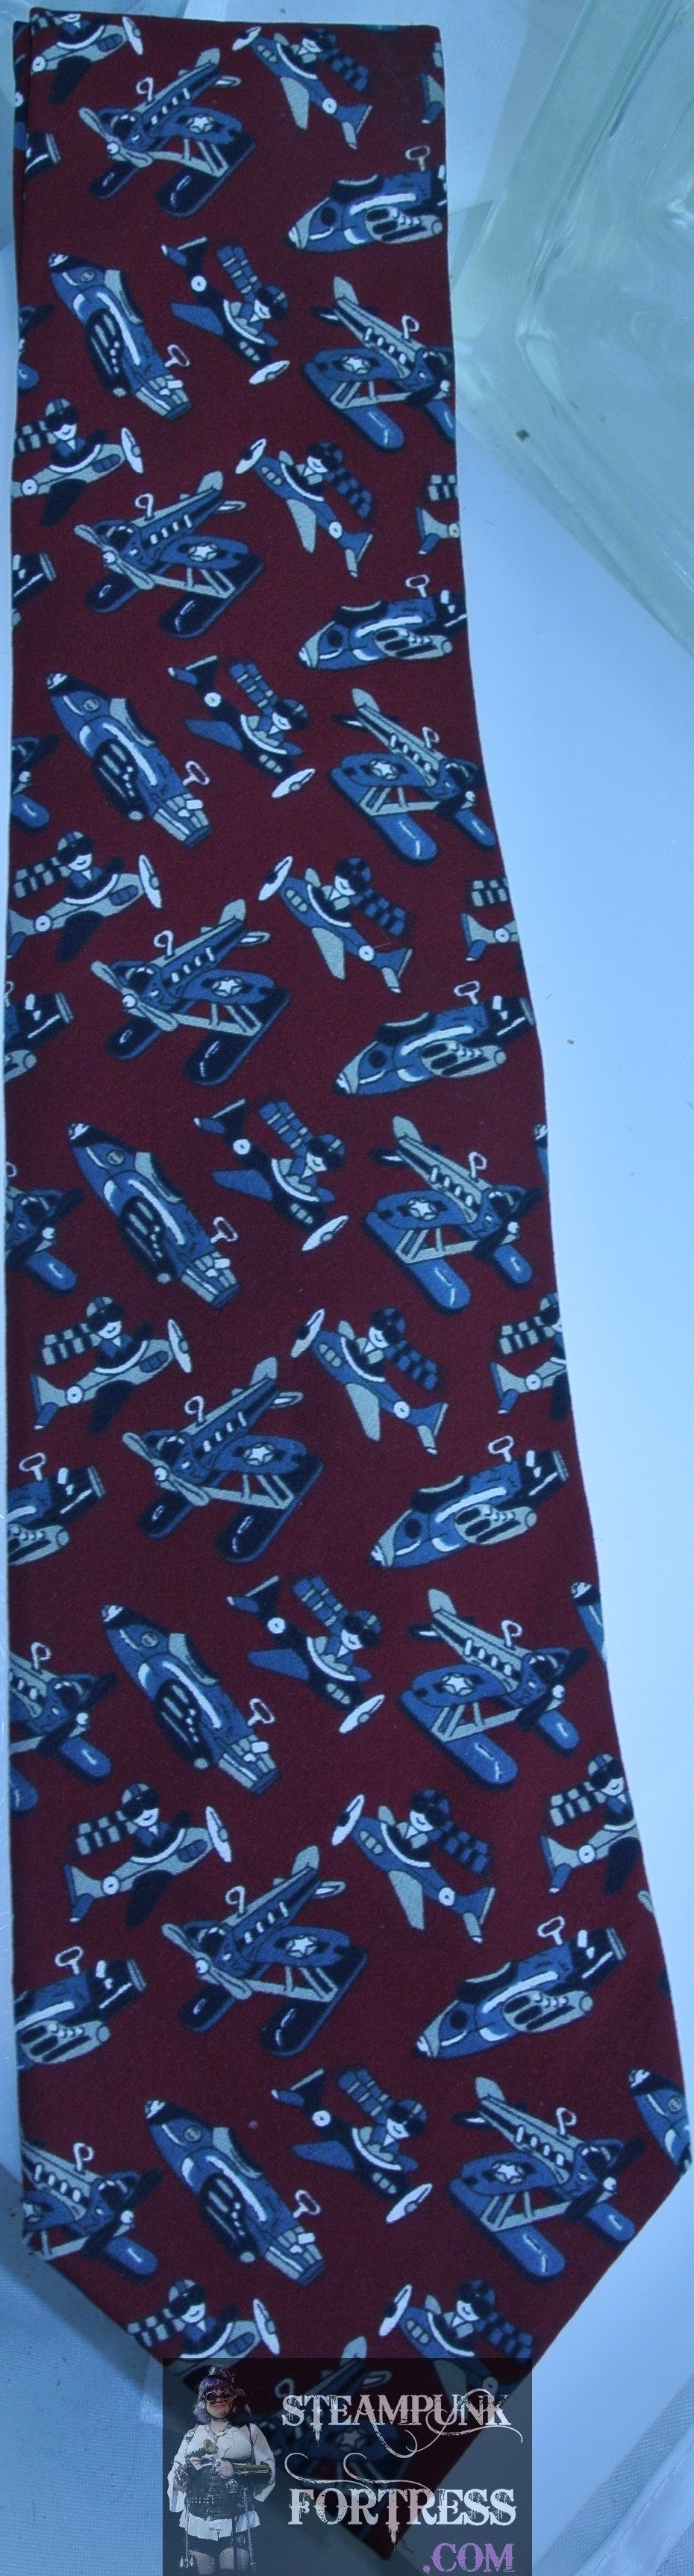 VINTAGE STRINGBEANS RED BOMBER TIE STEAMPUNK AIRPLANE RED BARON SEAPLANES GREY GRAY ACCENTS